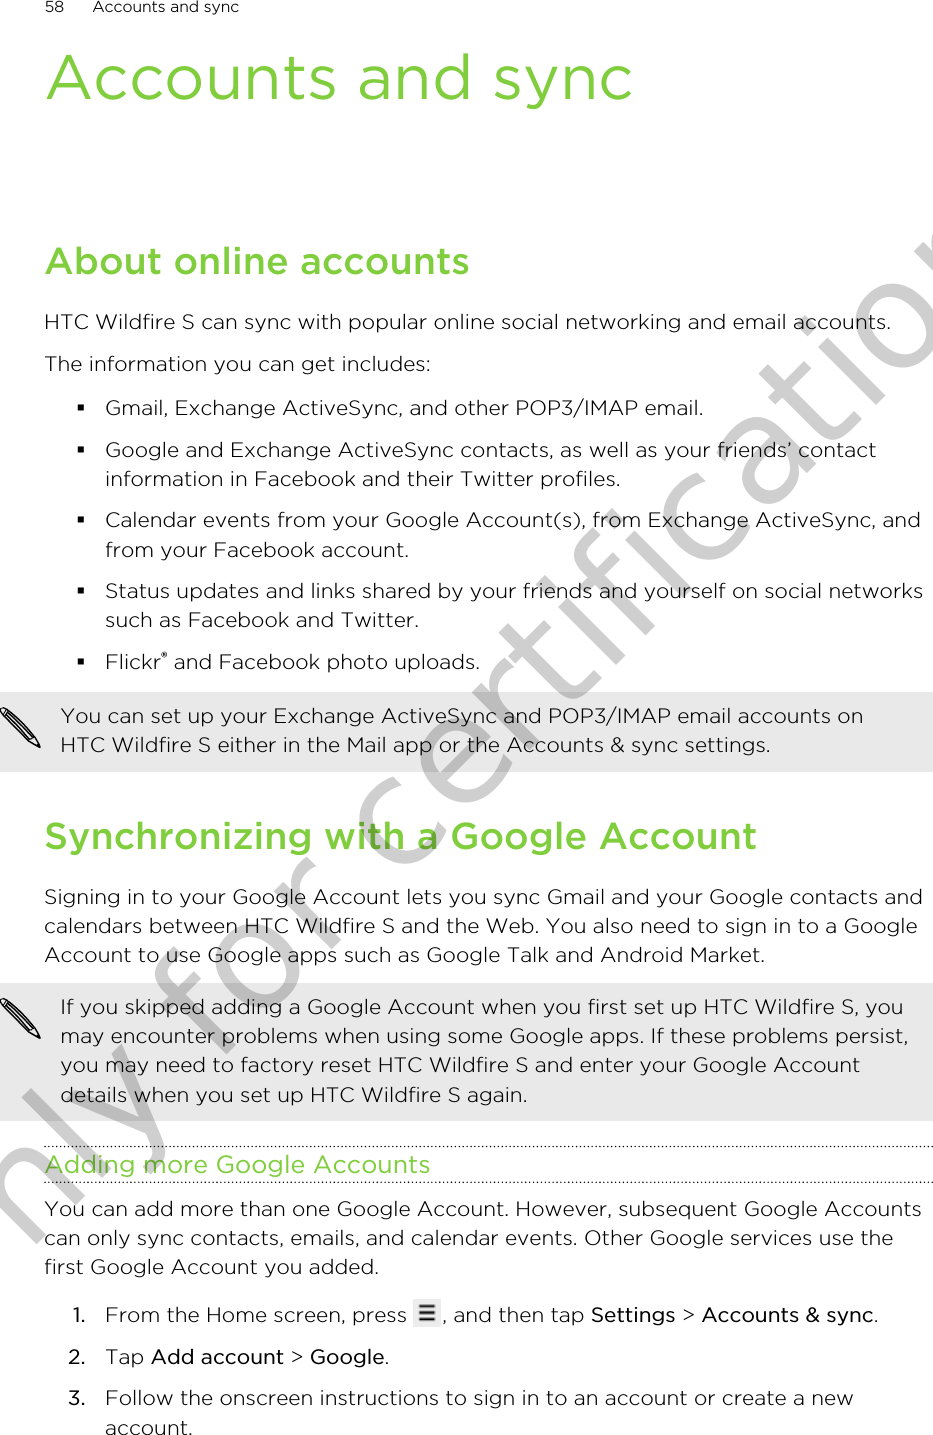 Accounts and syncAbout online accountsHTC Wildfire S can sync with popular online social networking and email accounts.The information you can get includes:§Gmail, Exchange ActiveSync, and other POP3/IMAP email.§Google and Exchange ActiveSync contacts, as well as your friends’ contactinformation in Facebook and their Twitter profiles.§Calendar events from your Google Account(s), from Exchange ActiveSync, andfrom your Facebook account.§Status updates and links shared by your friends and yourself on social networkssuch as Facebook and Twitter.§Flickr® and Facebook photo uploads.You can set up your Exchange ActiveSync and POP3/IMAP email accounts onHTC Wildfire S either in the Mail app or the Accounts &amp; sync settings.Synchronizing with a Google AccountSigning in to your Google Account lets you sync Gmail and your Google contacts andcalendars between HTC Wildfire S and the Web. You also need to sign in to a GoogleAccount to use Google apps such as Google Talk and Android Market.If you skipped adding a Google Account when you first set up HTC Wildfire S, youmay encounter problems when using some Google apps. If these problems persist,you may need to factory reset HTC Wildfire S and enter your Google Accountdetails when you set up HTC Wildfire S again.Adding more Google AccountsYou can add more than one Google Account. However, subsequent Google Accountscan only sync contacts, emails, and calendar events. Other Google services use thefirst Google Account you added.1. From the Home screen, press  , and then tap Settings &gt; Accounts &amp; sync.2. Tap Add account &gt; Google.3. Follow the onscreen instructions to sign in to an account or create a newaccount.58 Accounts and syncOnly for certification